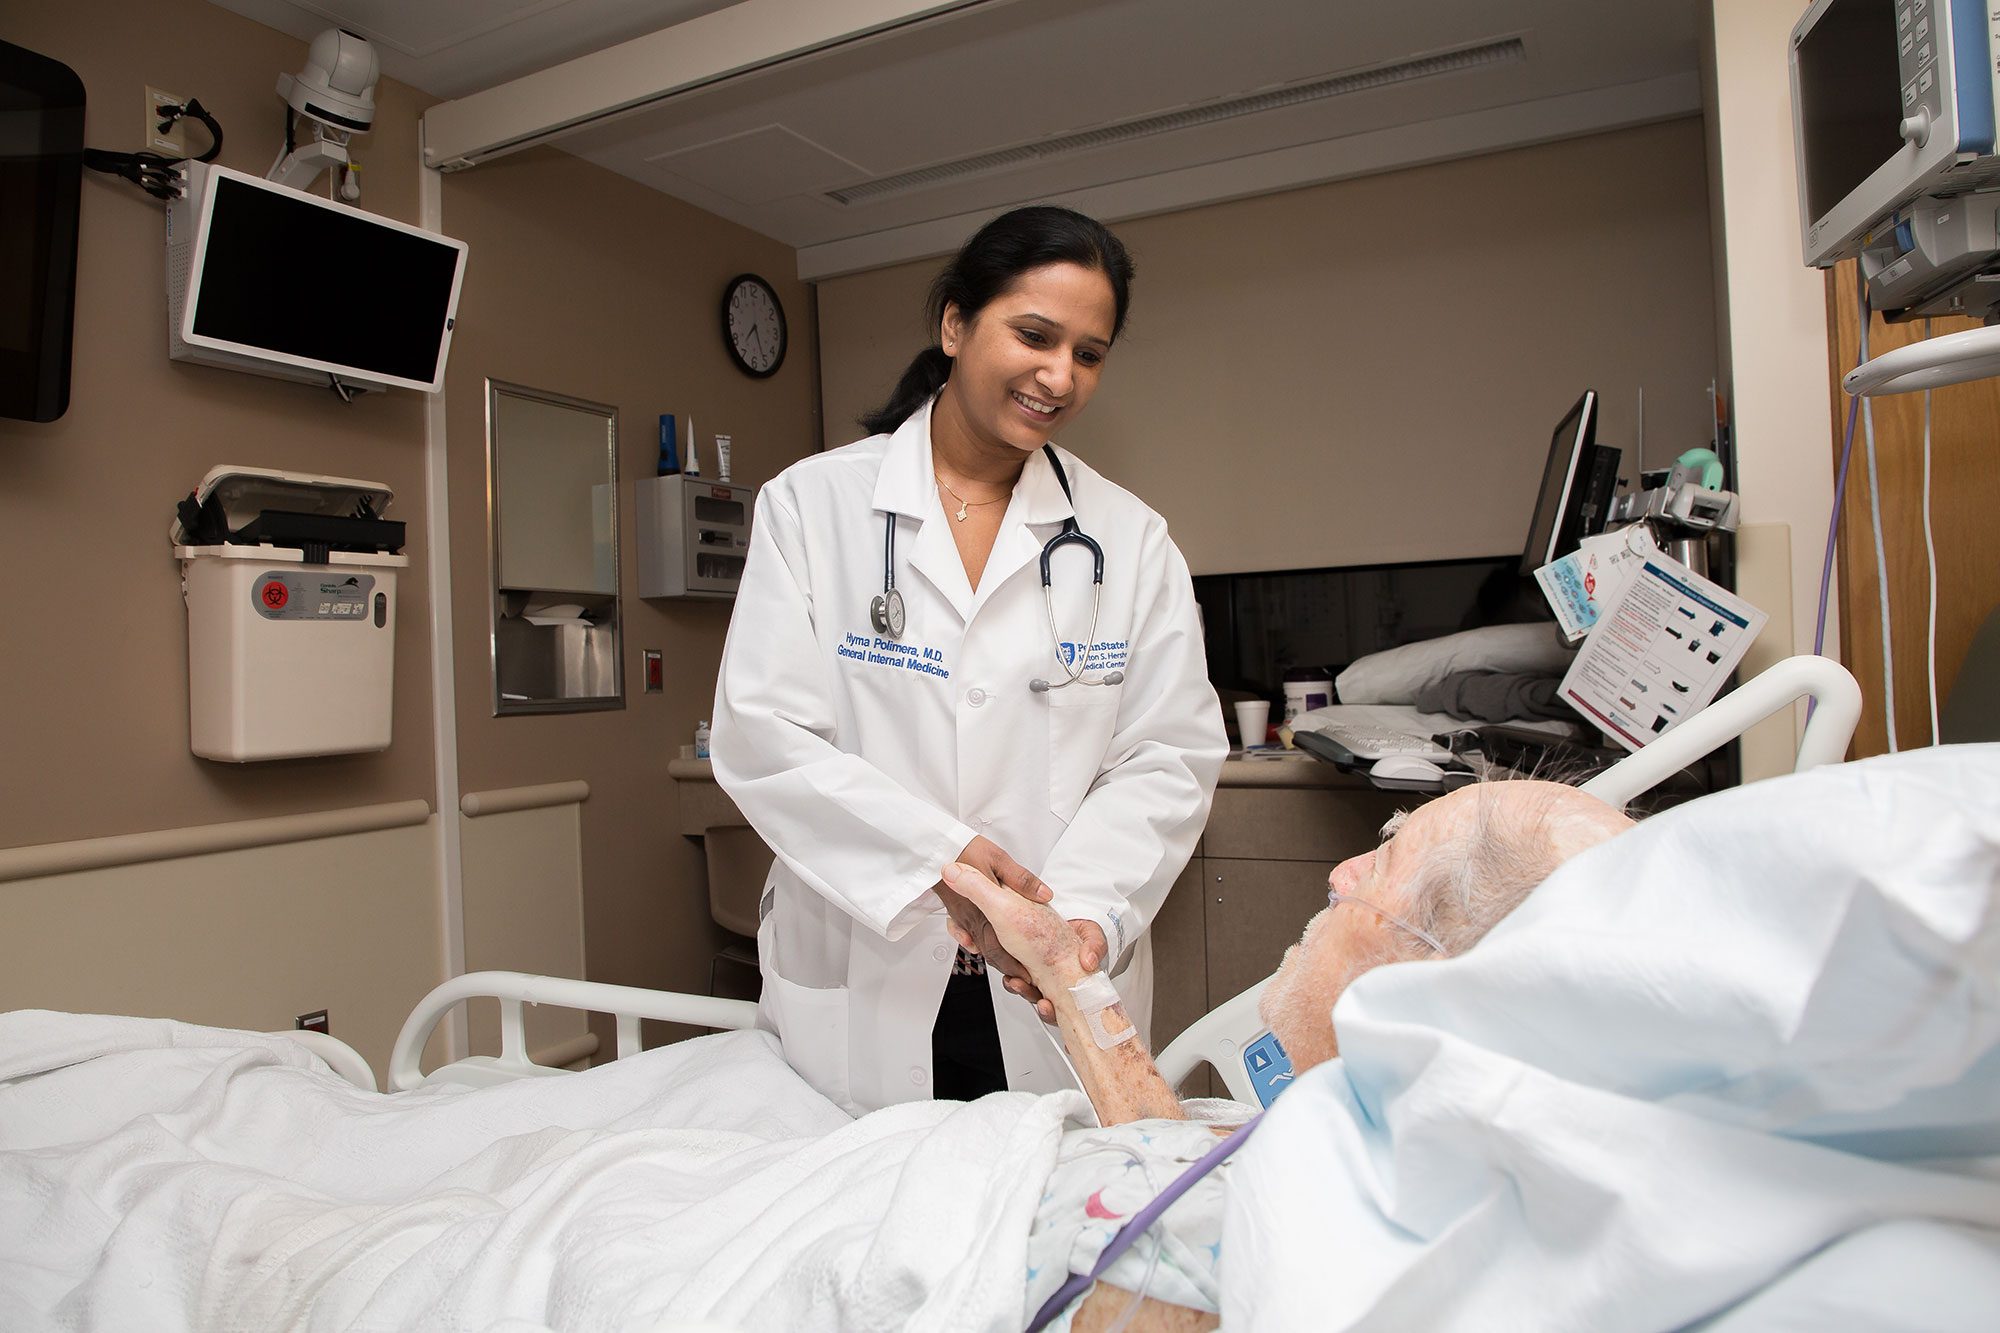 A photo shows Dr. Hyma Polimera at the bedside of a patient at Penn State Health Milton S. Hershey Medical Center.